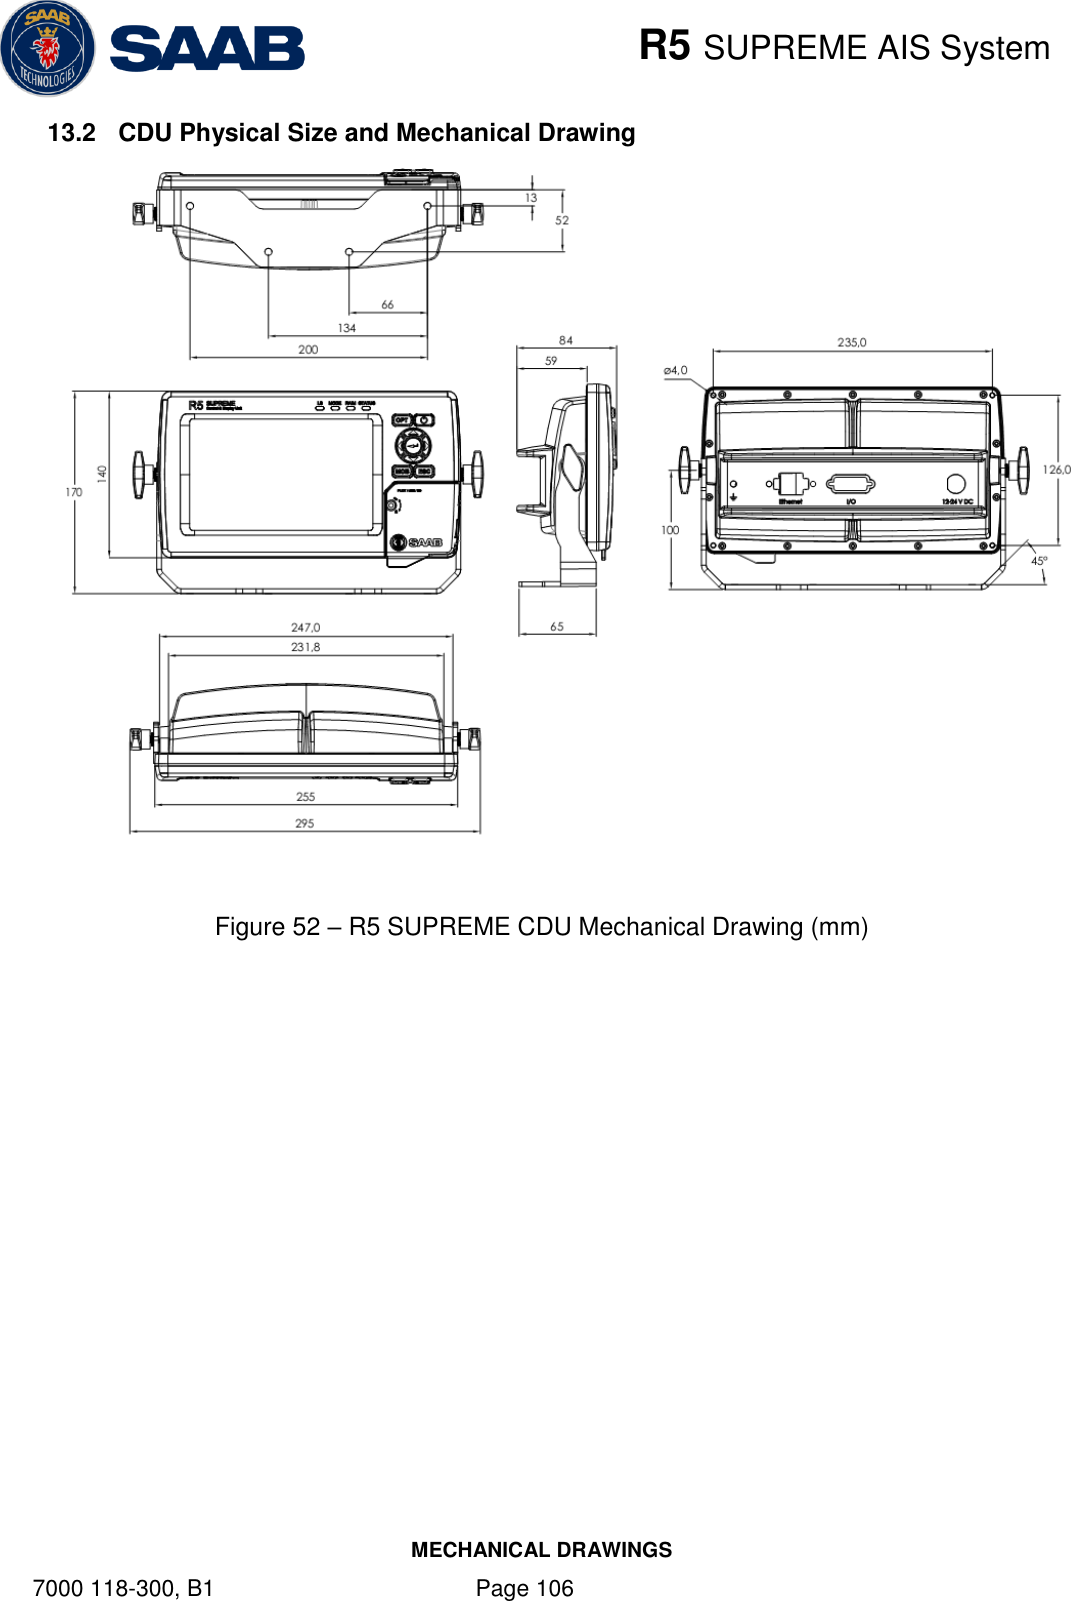    R5 SUPREME AIS System MECHANICAL DRAWINGS 7000 118-300, B1    Page 106 13.2  CDU Physical Size and Mechanical Drawing   Figure 52 – R5 SUPREME CDU Mechanical Drawing (mm)   